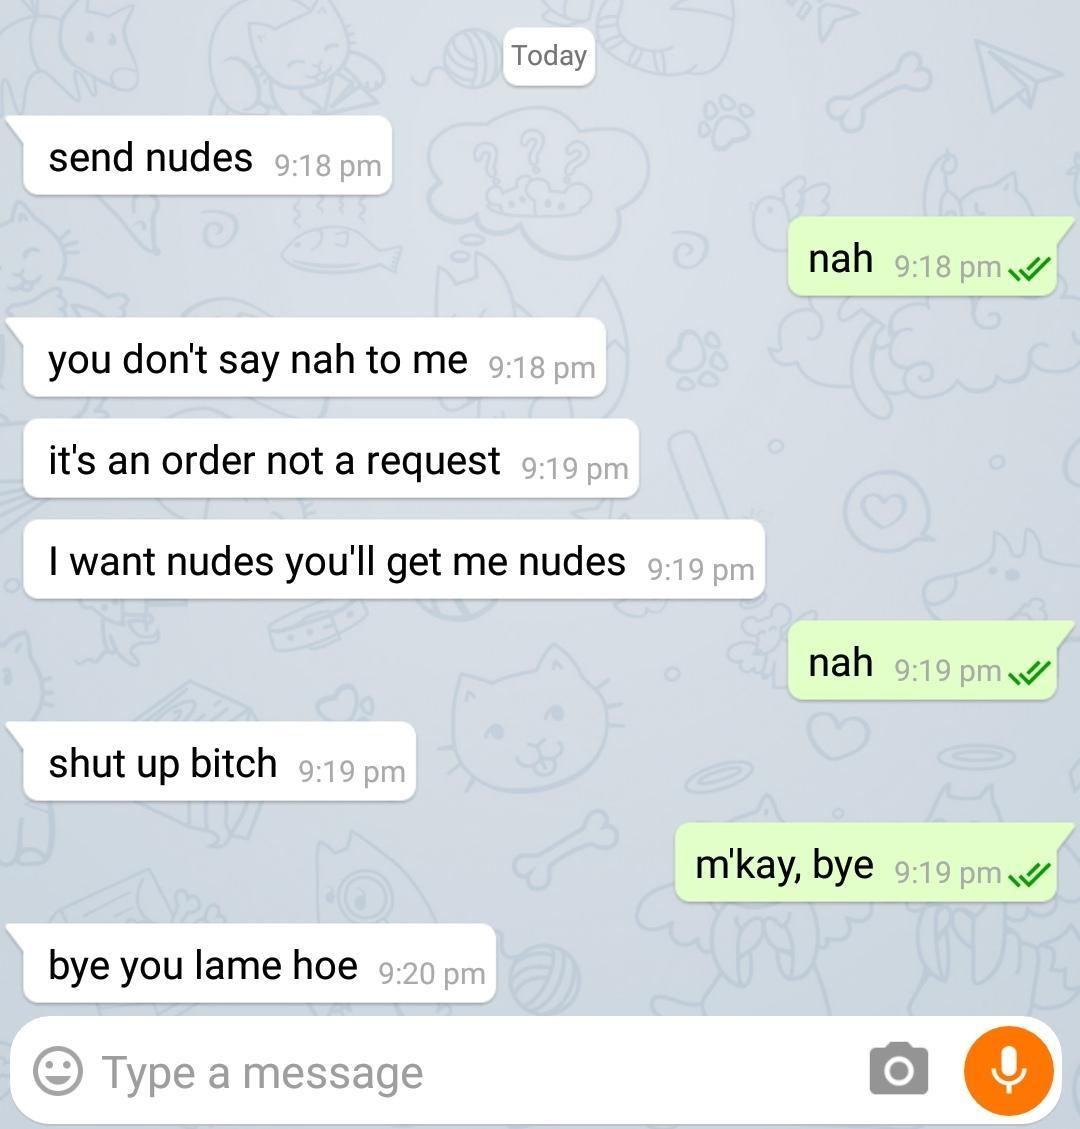 screenshot - Today send nudes nah you don't say nah to me it's an order not a request I want nudes you'll get me nudes nah w shut up bitch m'kay, bye bye you lame hoe Type a message